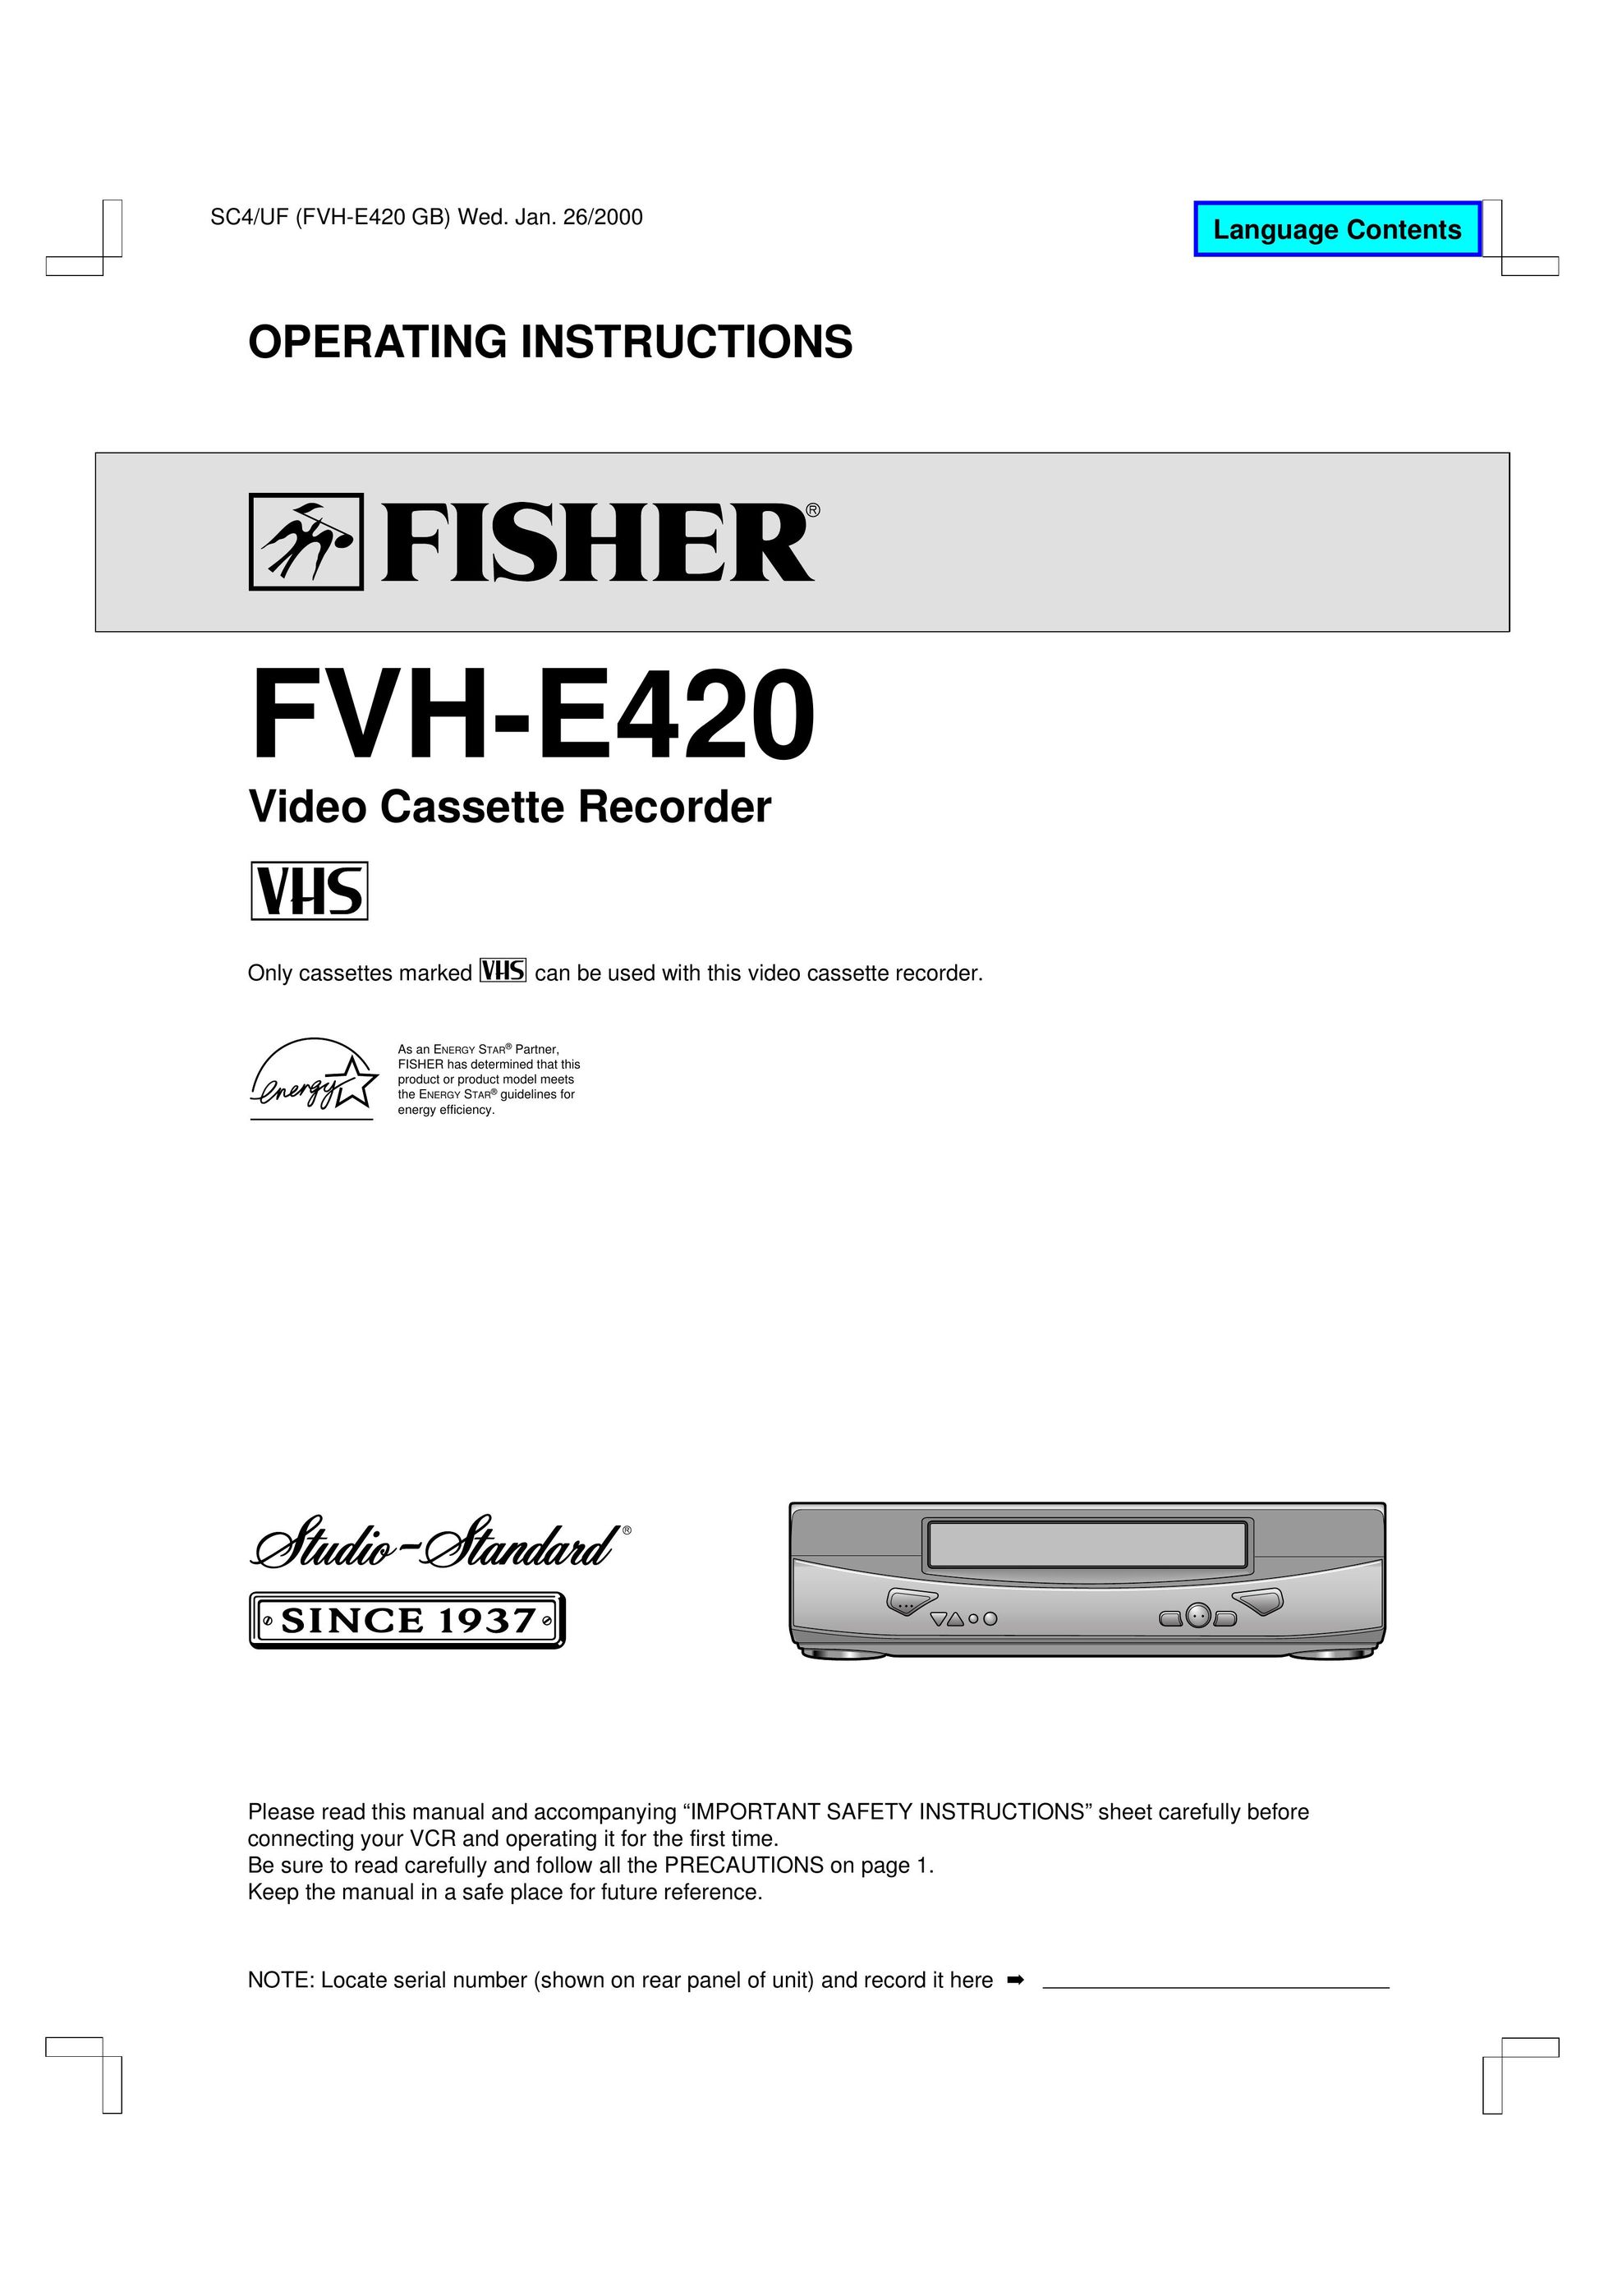 Fisher FVH-E420 VCR User Manual